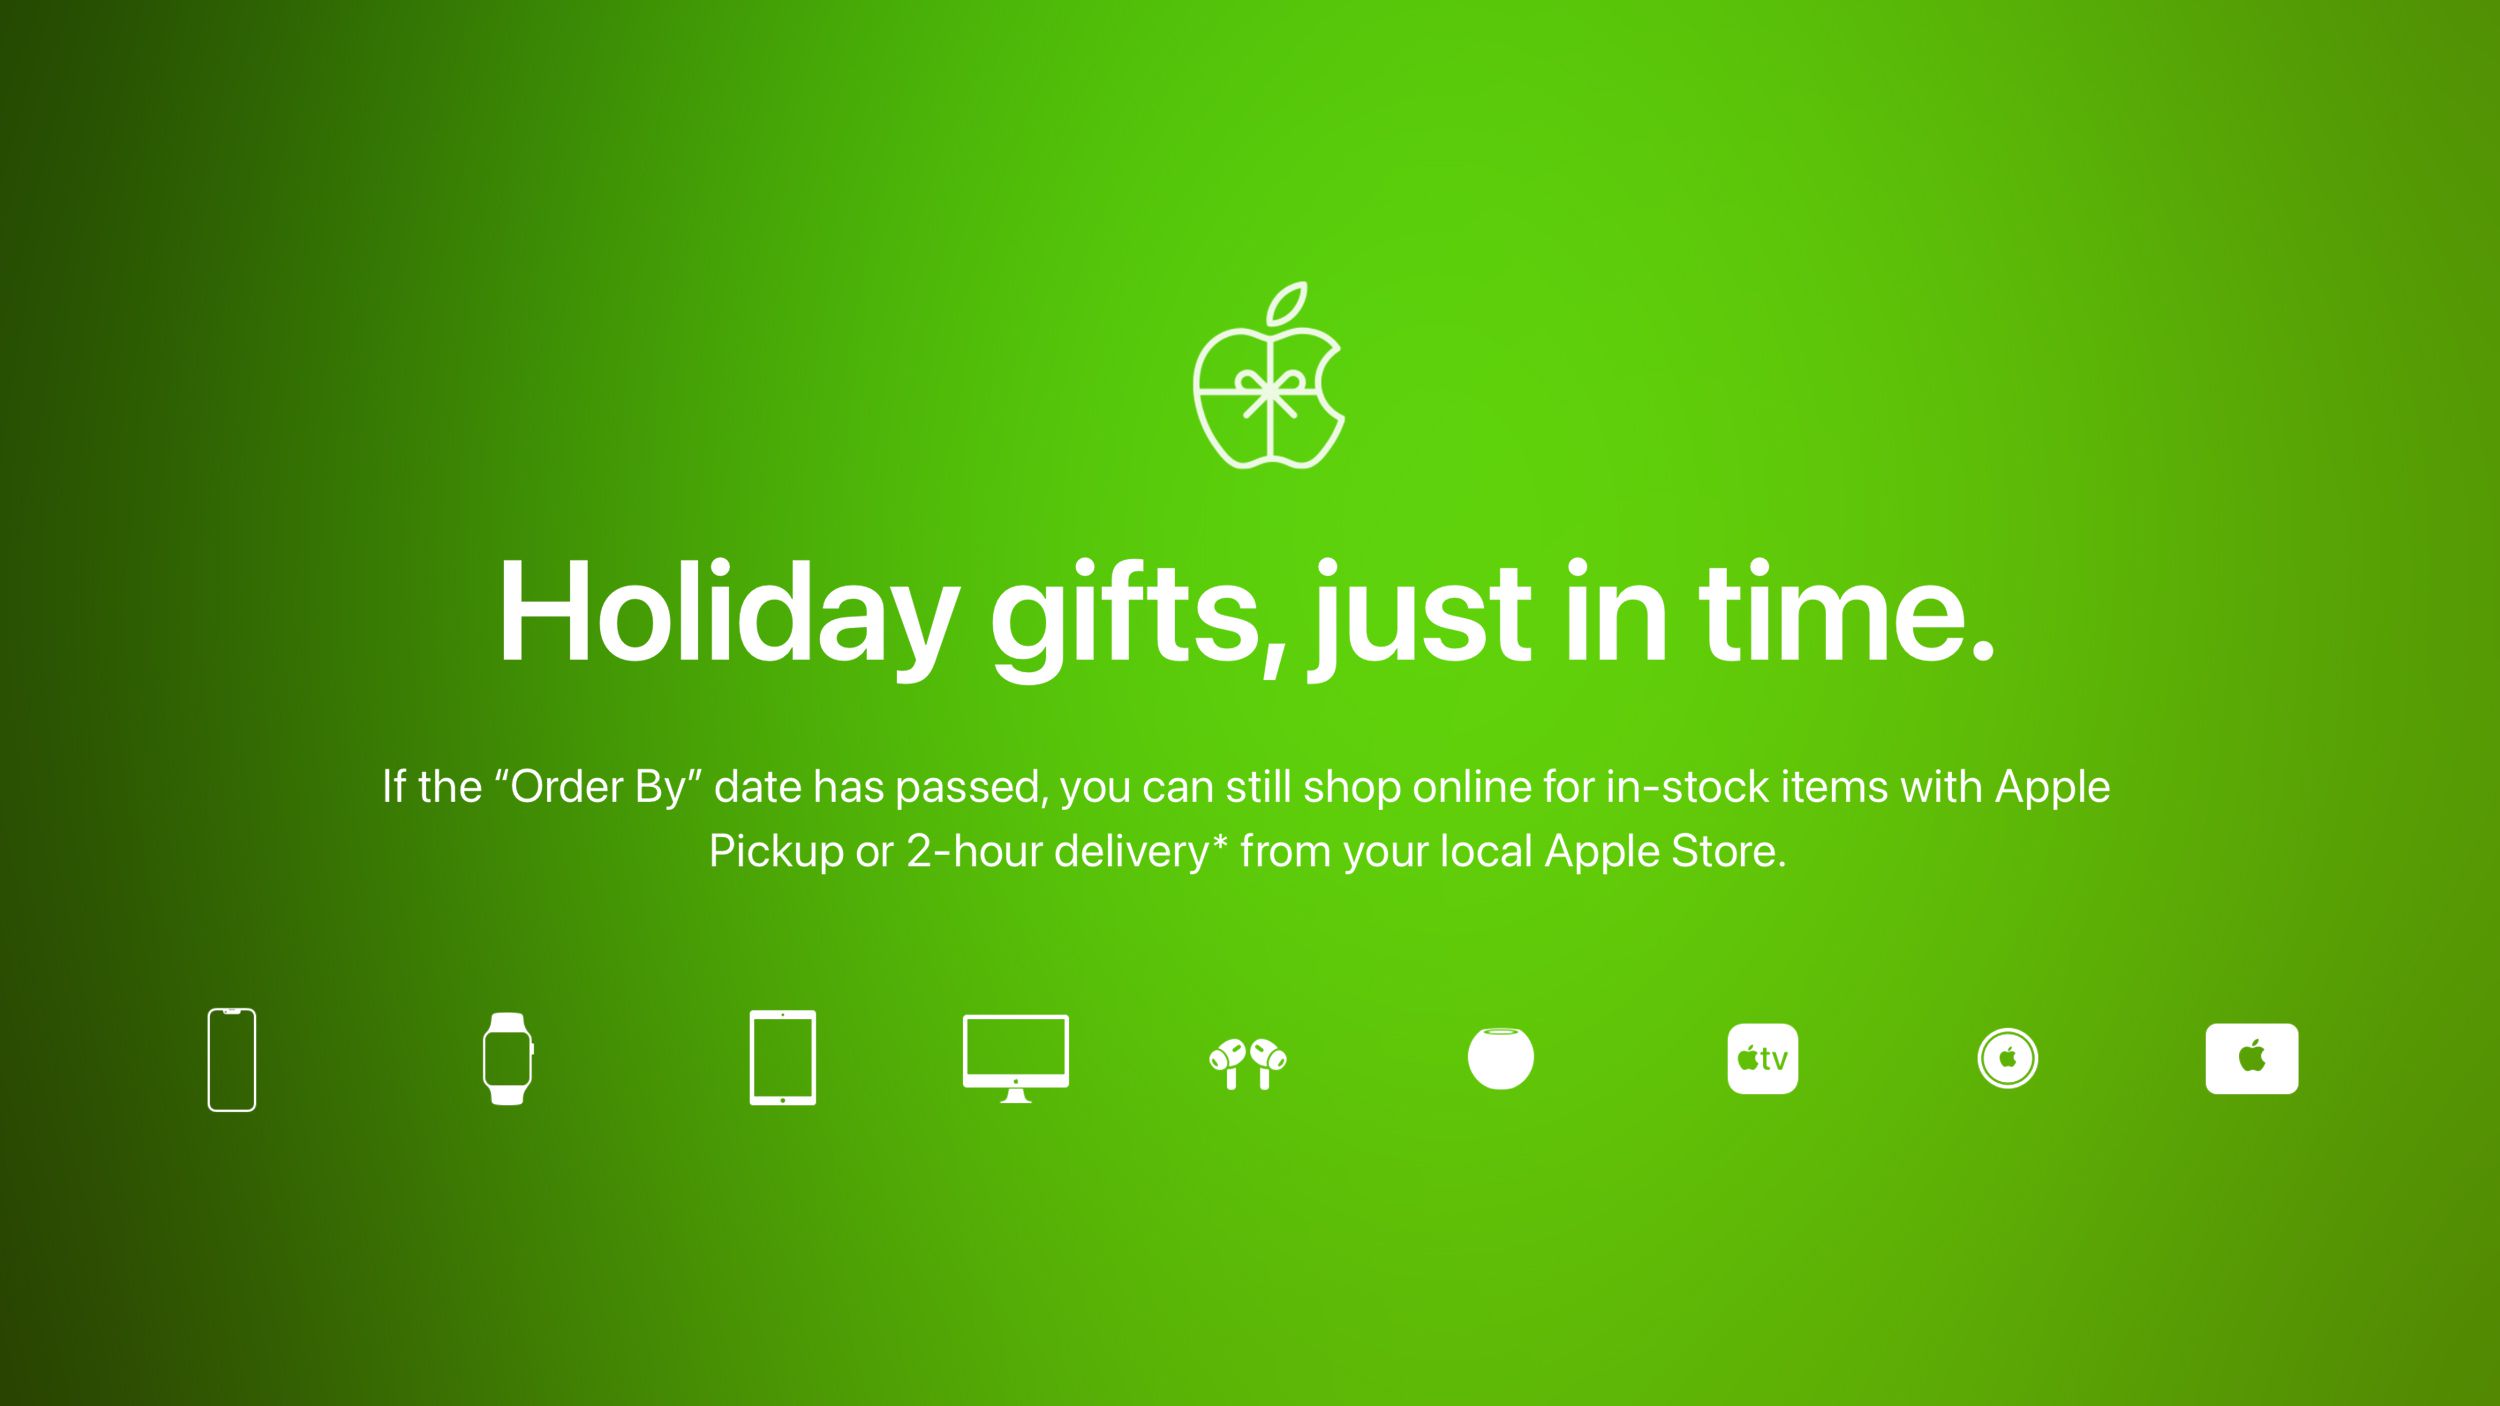 Apple Shares Deadlines for Ordering Holiday Gifts